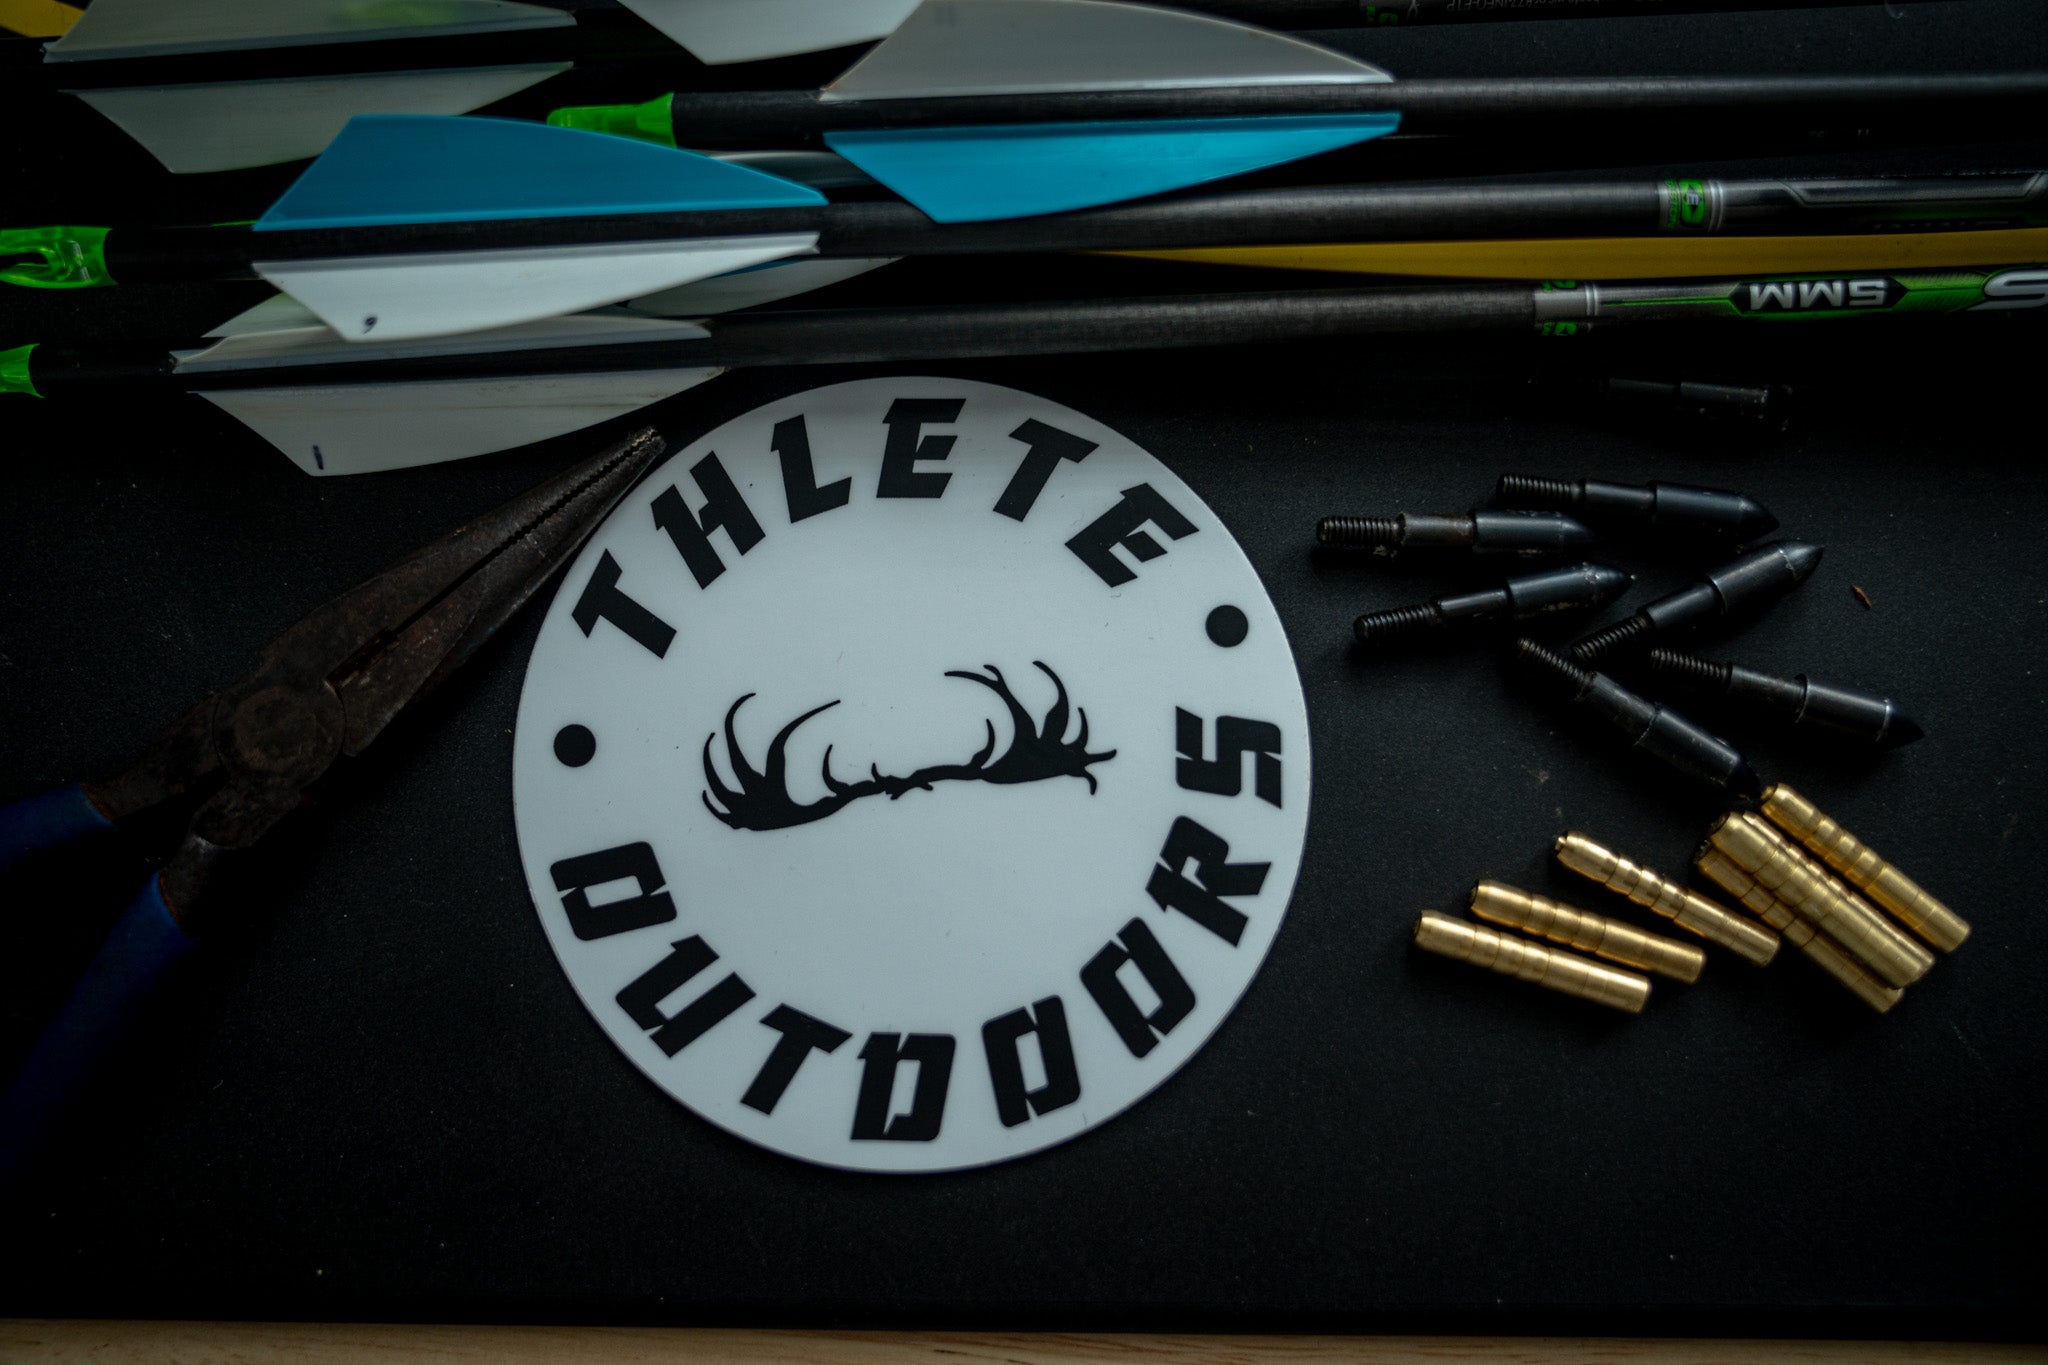 Thlete Outdoors Round Decal